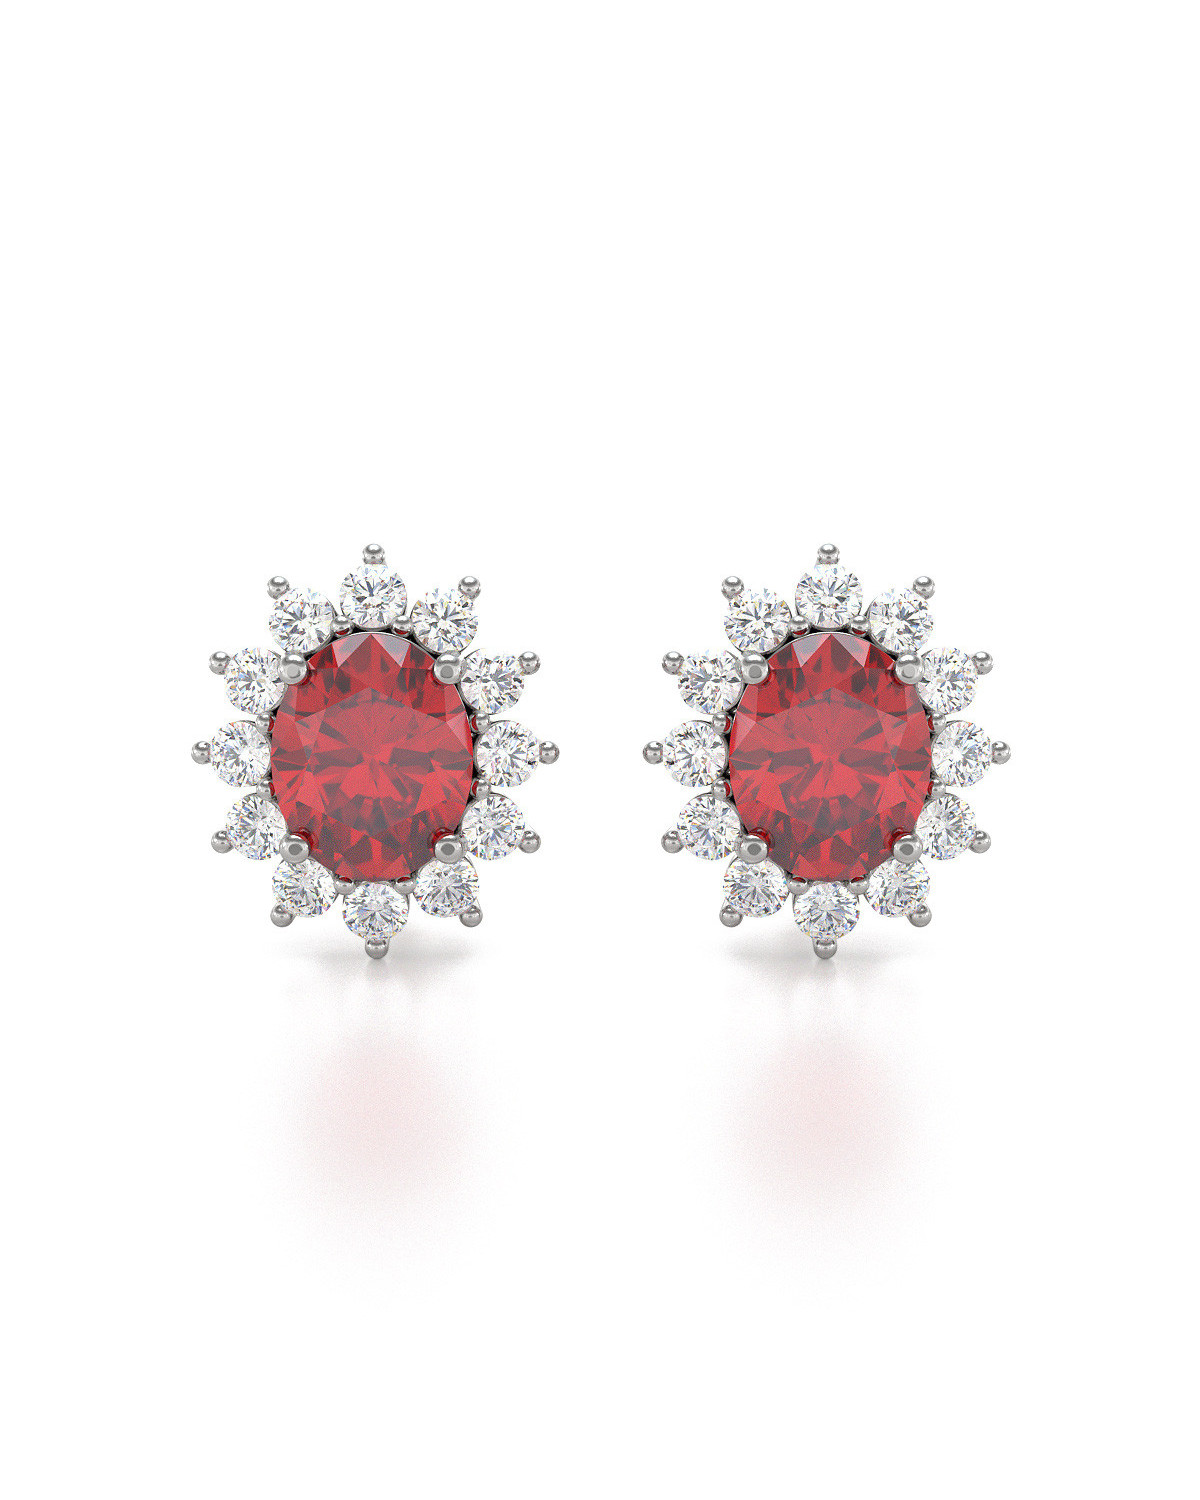 Boucles d'oreille Or Blanc et Rubis Forme Marquise 1.25grs